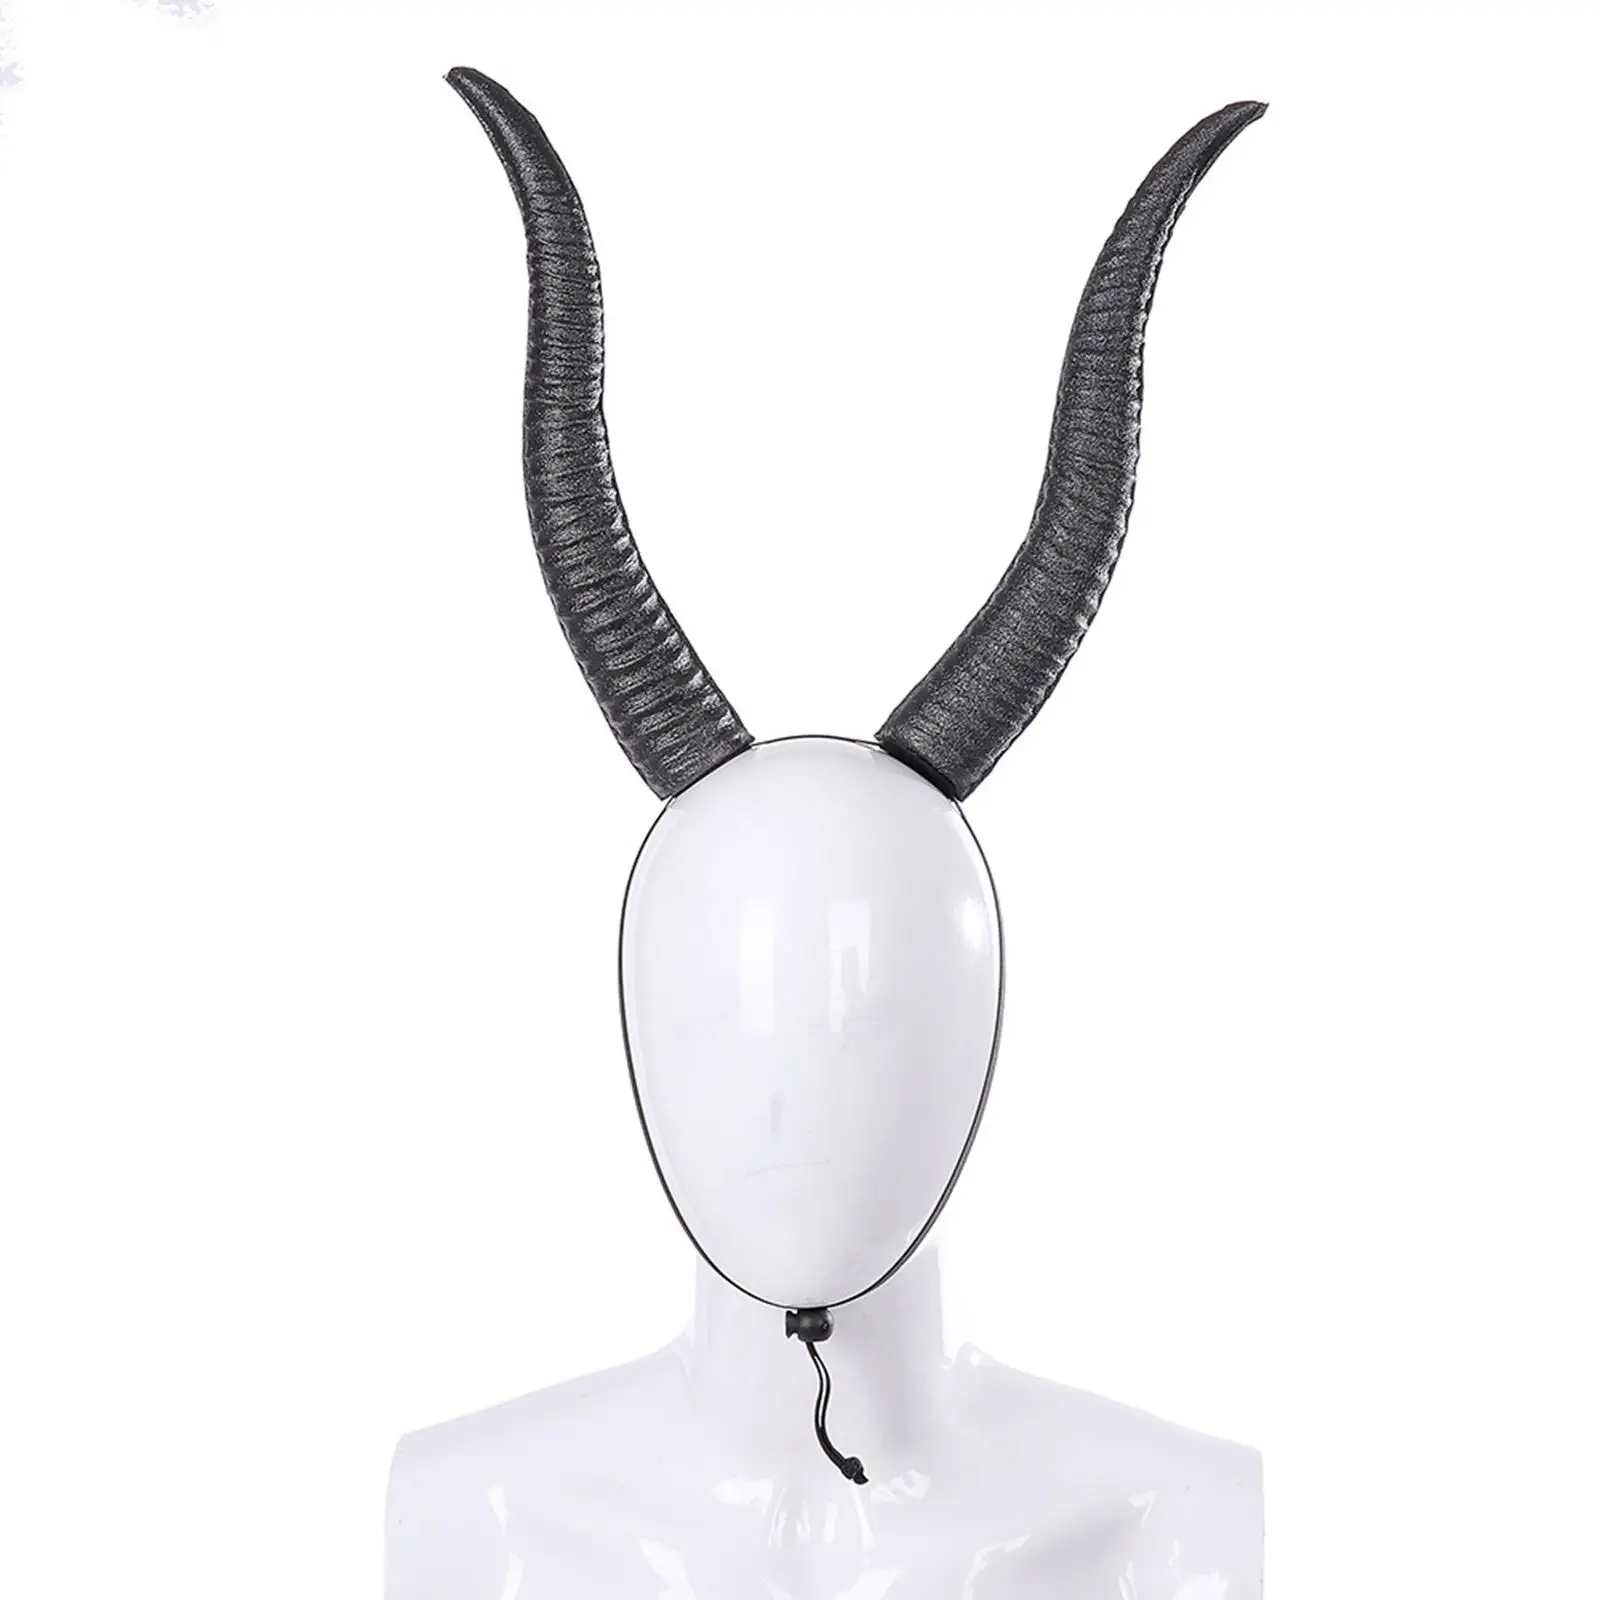 Sheep Horn Headband Long Devils Horn Hairband Hair Accessory for Party Prop